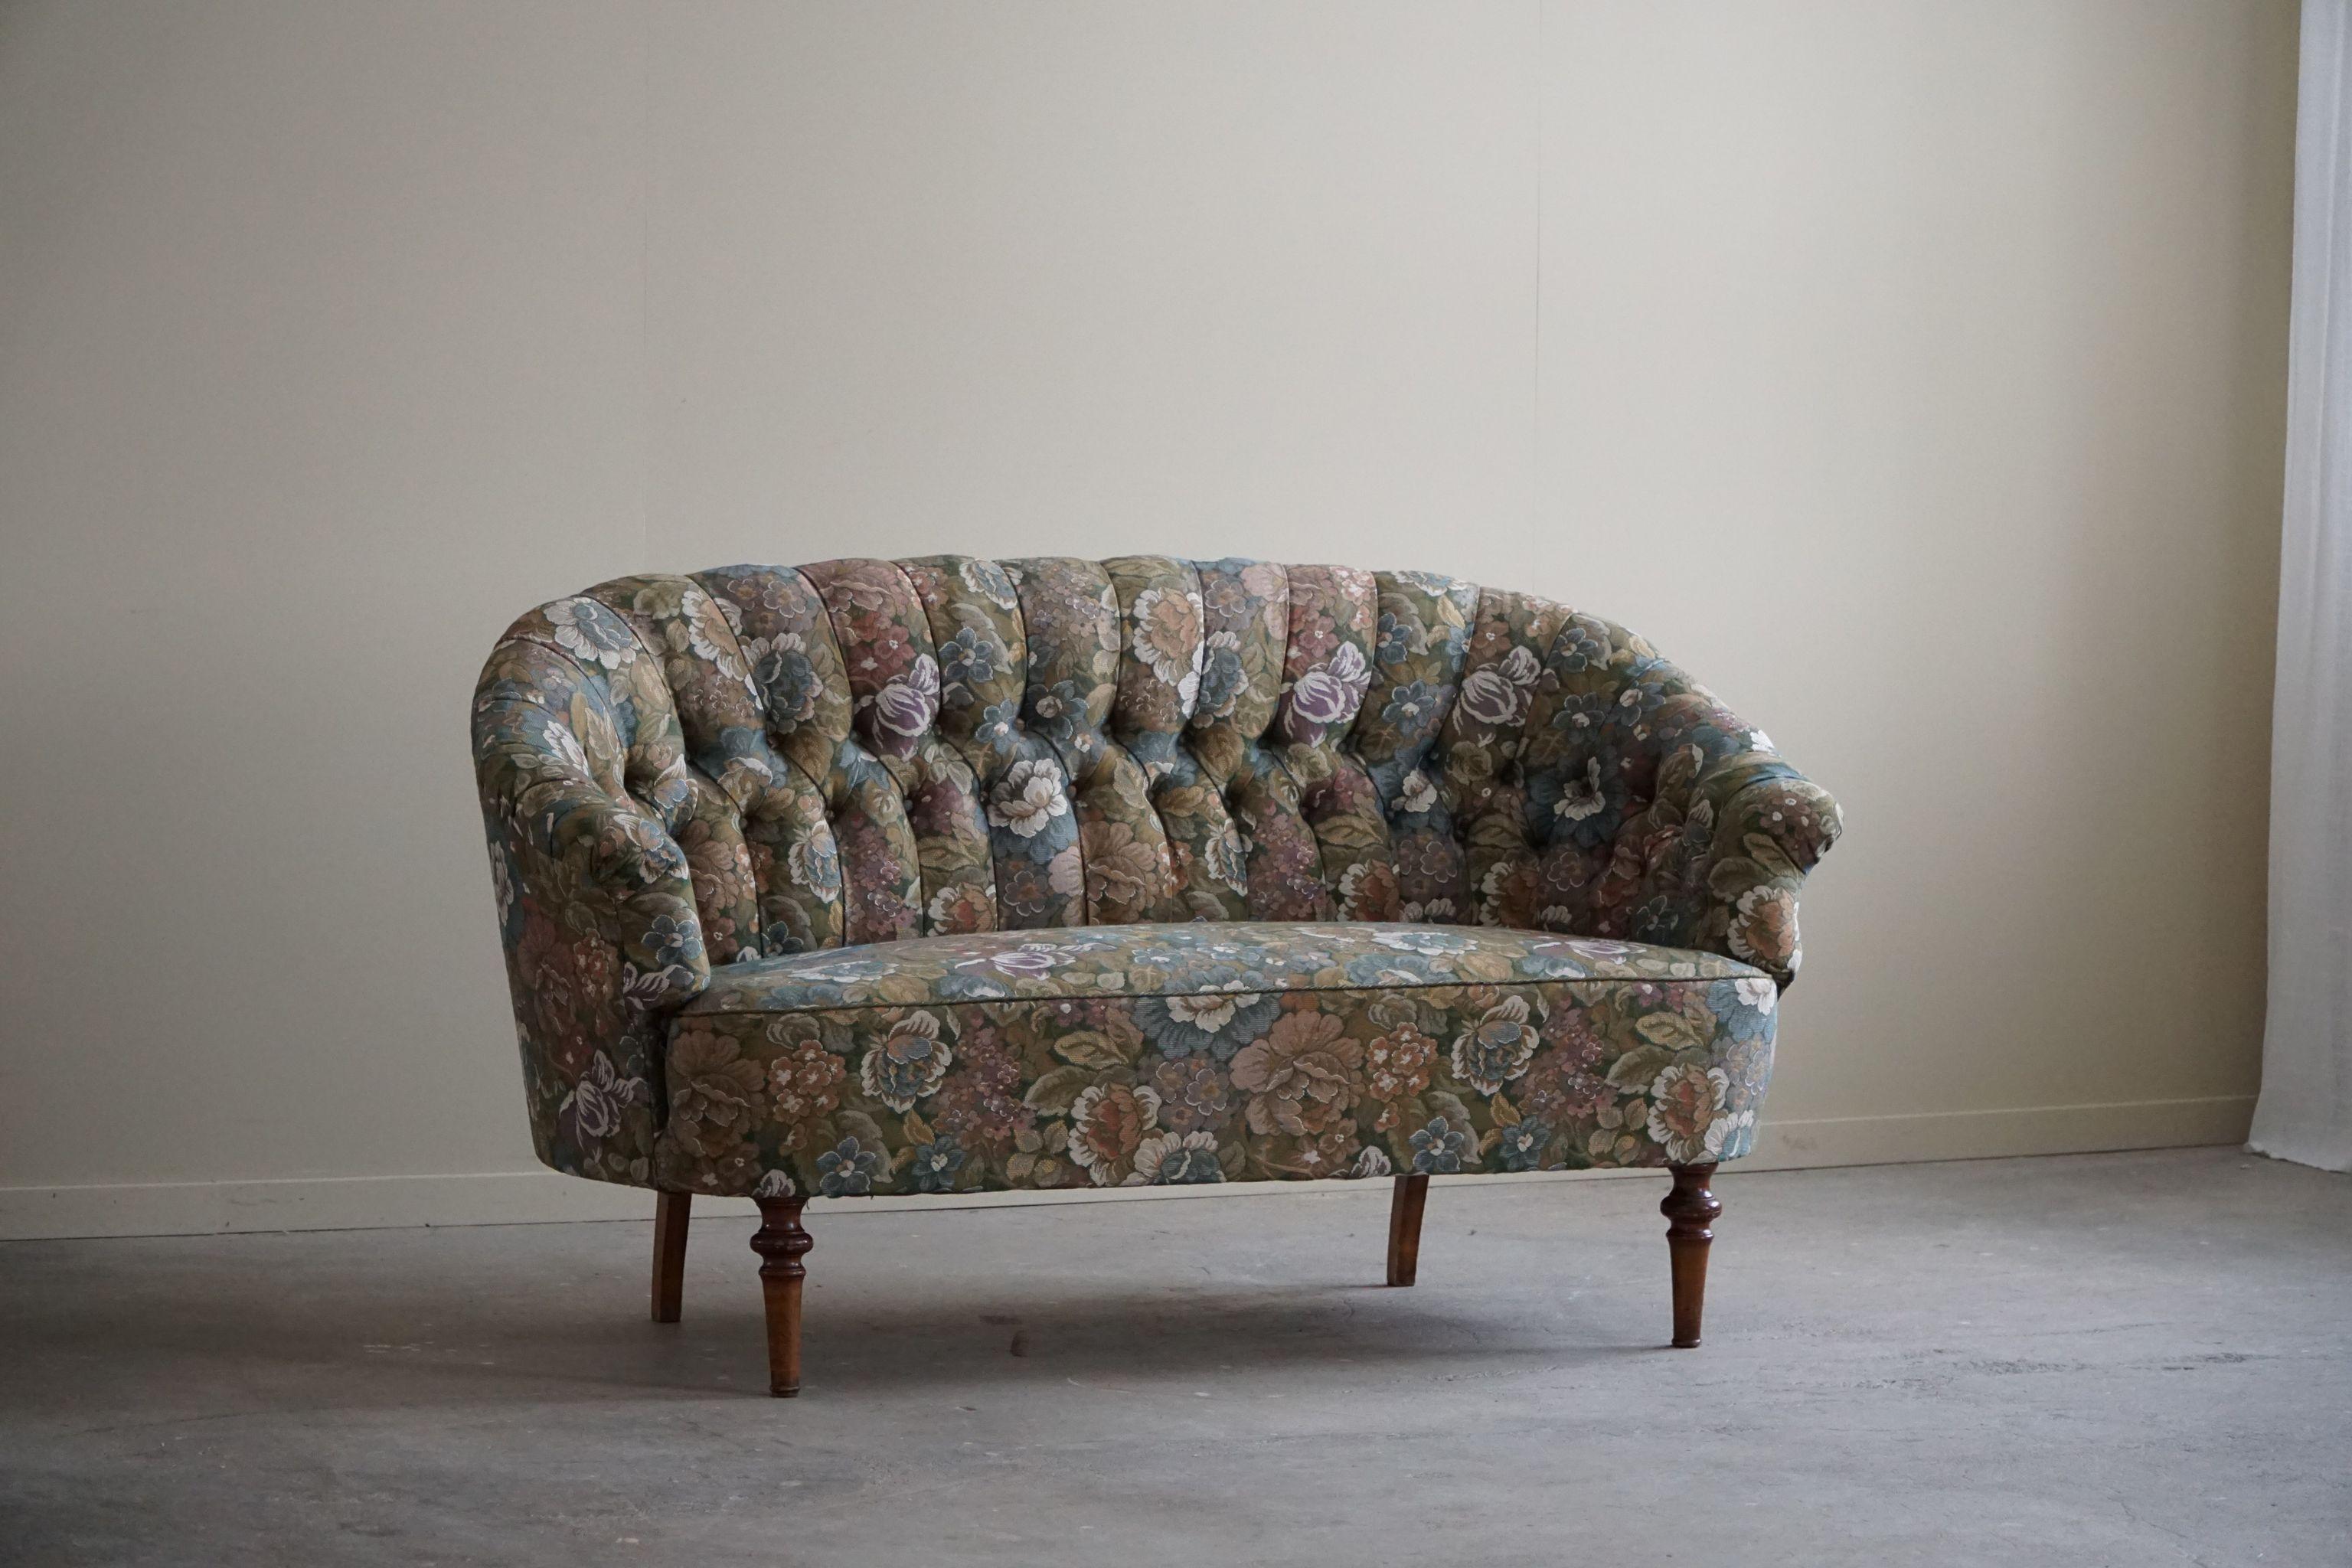 Antique Curved Sofa with Flora Fabric, By a Danish Cabinetmaker, Early 1900s 9